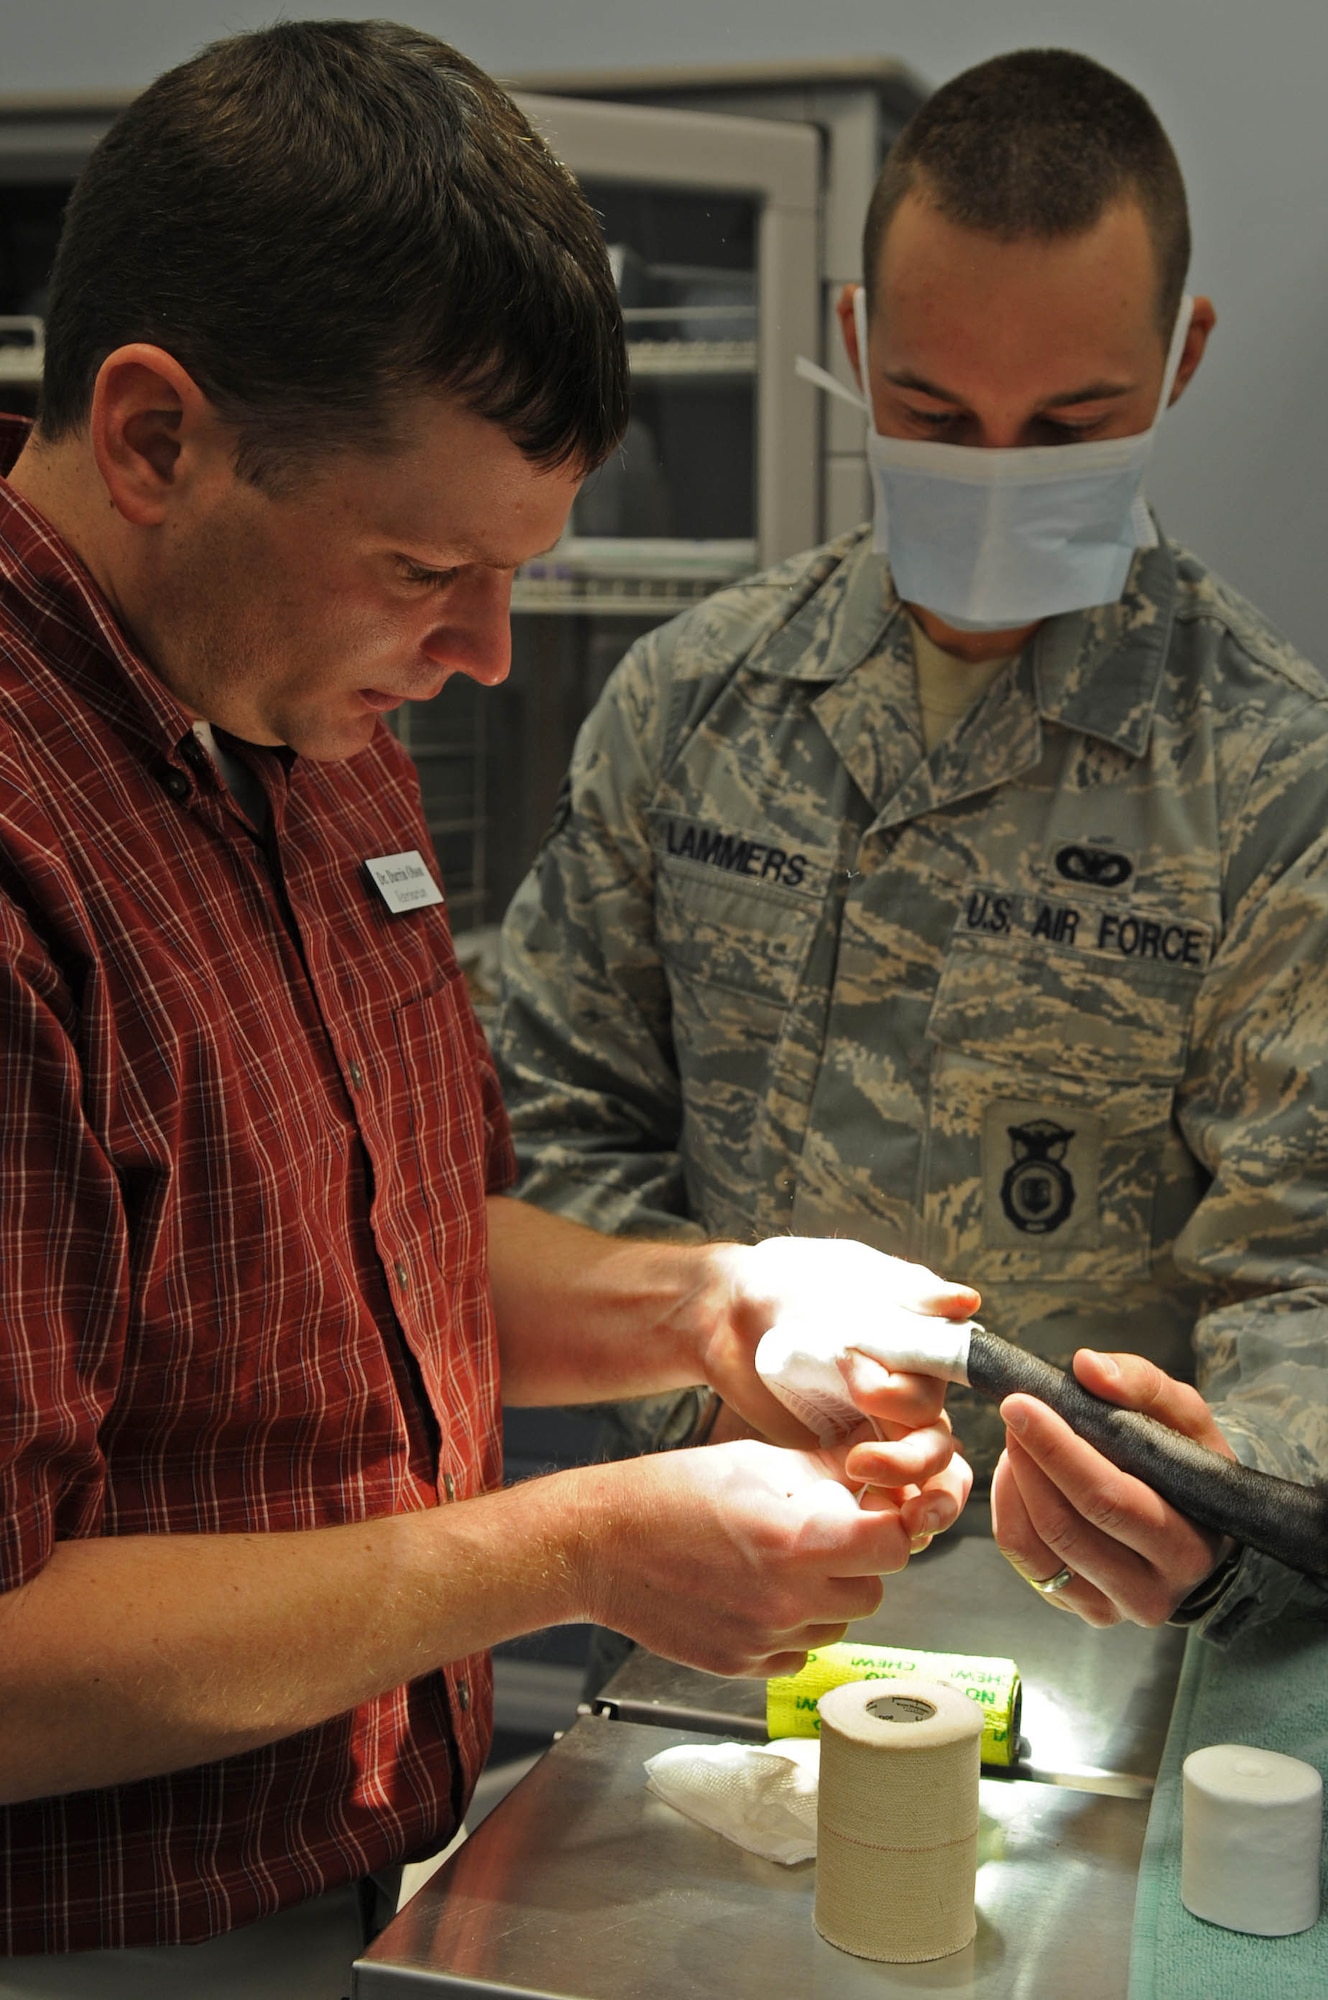 BARKSDALE AIR FORCE BASE, La – Senior Airman Stephen Lammers assist Dr. Darrin Olson in wrapping up Military Working Dog Febe’s tail after performing a partial amputation March 26. During the procedure, Airman Lammers was able to apply his technical training by helping to check Febe’s vitals and temperature. On average, dog handlers receive 40 hours of hands-on medical training after arriving on station. This training enables them to perform minor procedures or stabilize the dog until they are able to get more advanced medical care. Airman Lammers and Febe are assigned to the 2d Security Forces Squadron K-9 unit here. (U.S. Air Force photo by Staff Sgt. Terri Barriere)